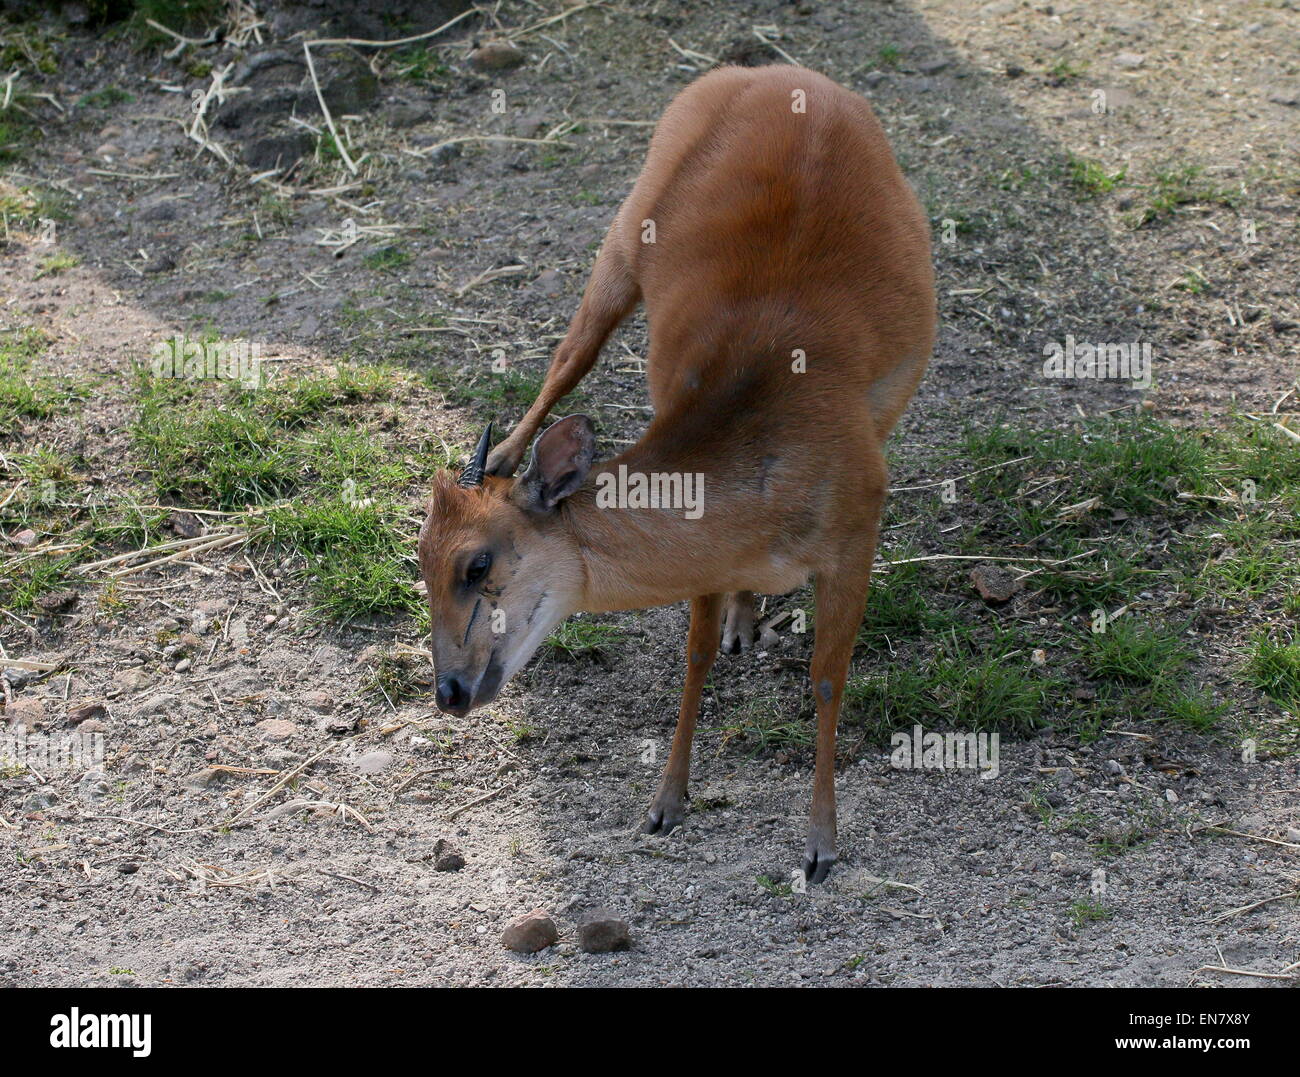 Small African Red forest duiker or Natal duiker antelope (Cephalophus natalensis) with an itch scratching his head with hind leg Stock Photo